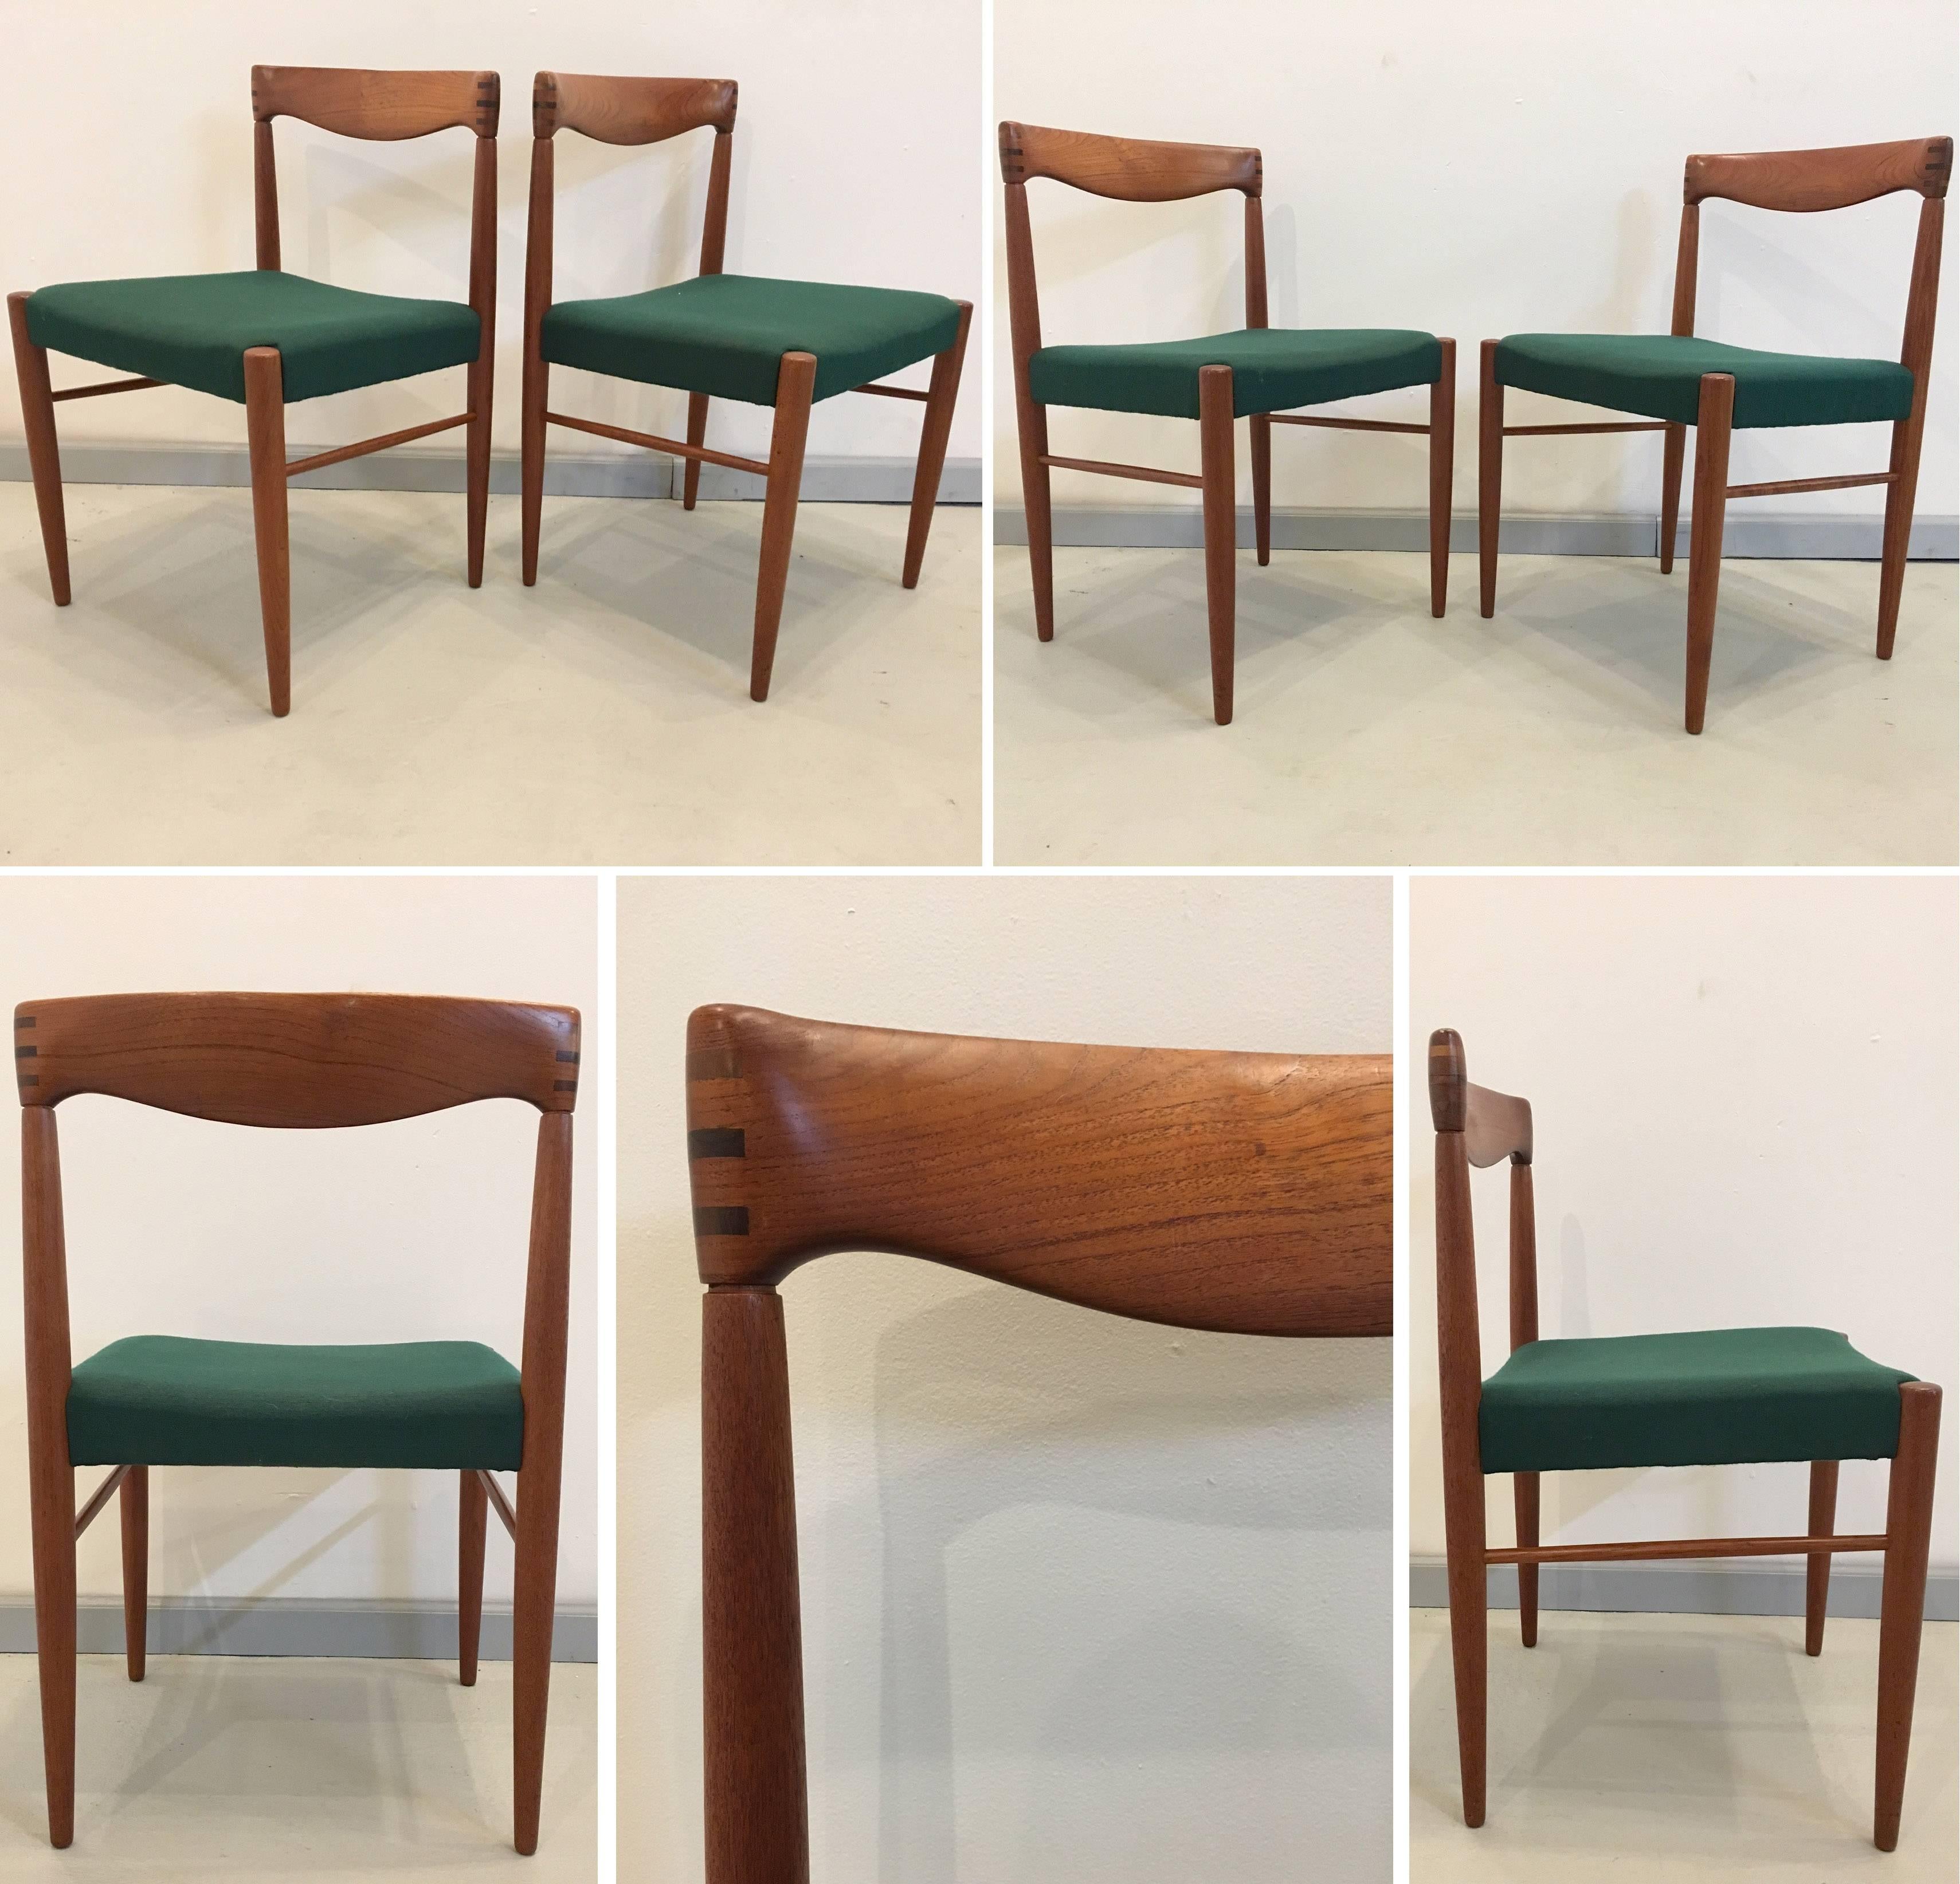 Mid-Century Modern table and chairs designed by Henry Walter Klein Bramin Møbelfarik. Six chairs with sculpted backs, extendable table with leaf, all featuring the unique rosewood accents at the joints.

Chairs: 30 high, 19 wide, 17.5 seat